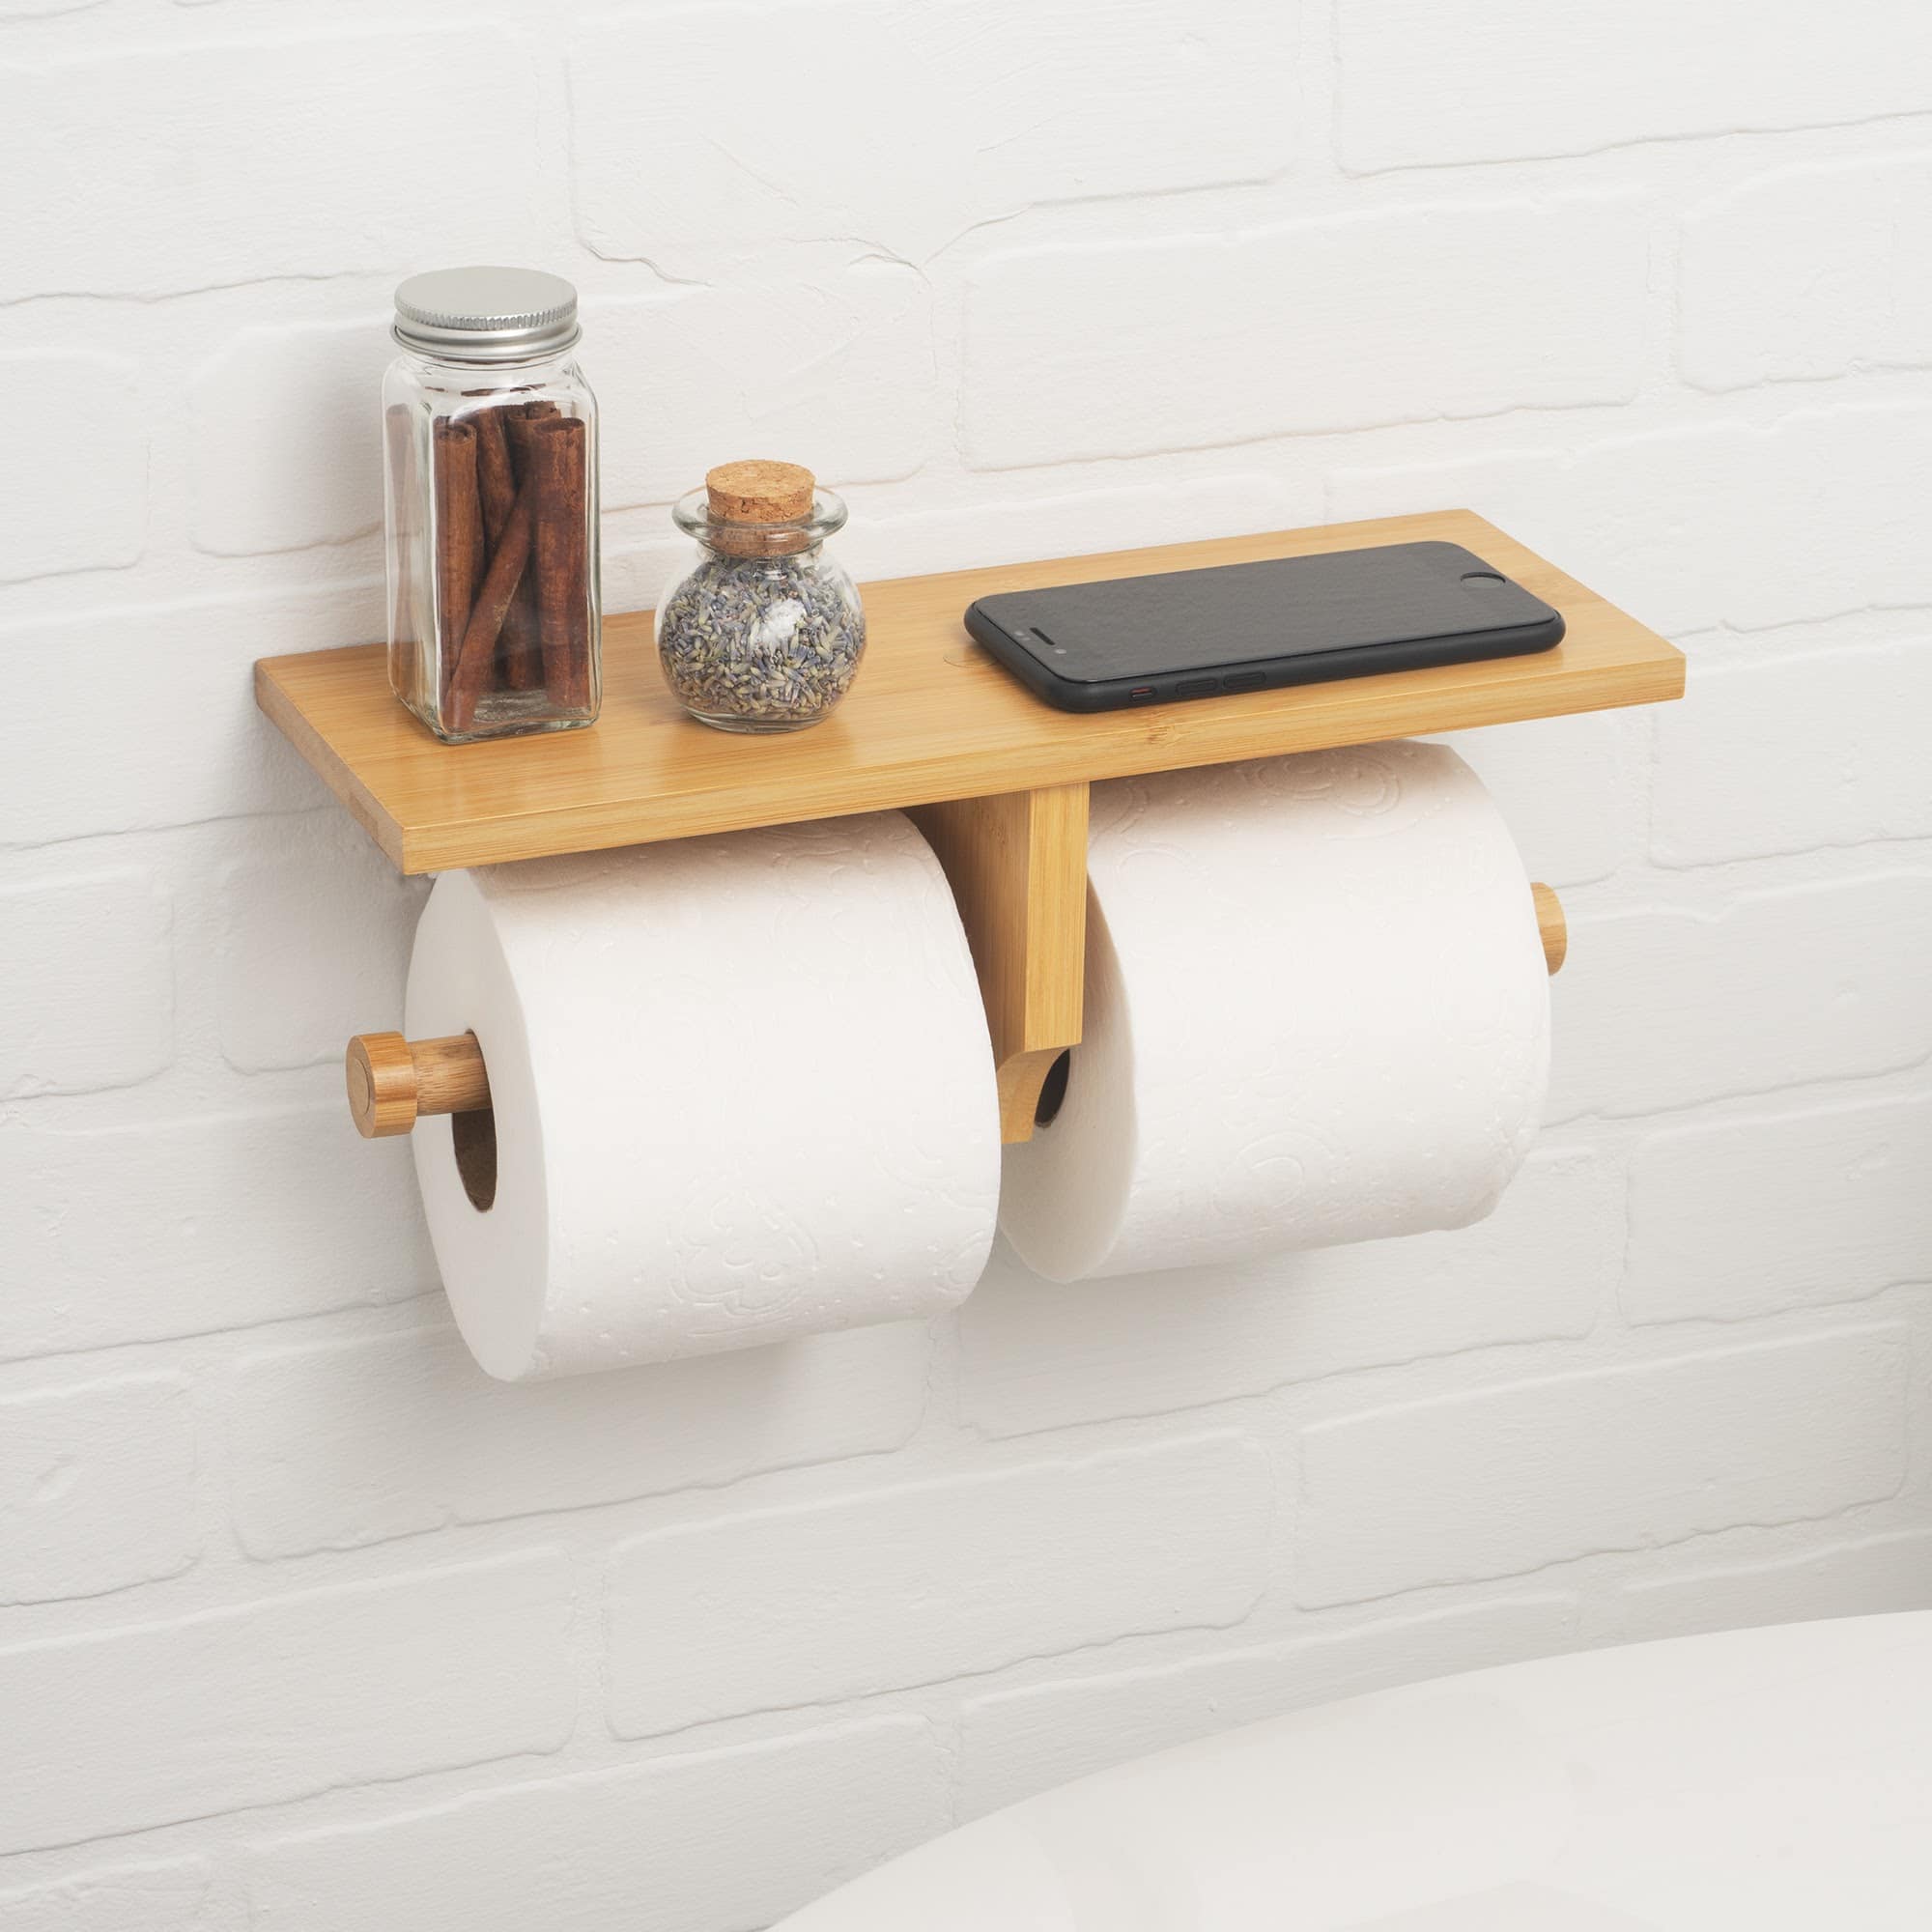 Waydeli double toilet paper holder - double toilet paper roll holder with  shelf, adhesive no drilling or